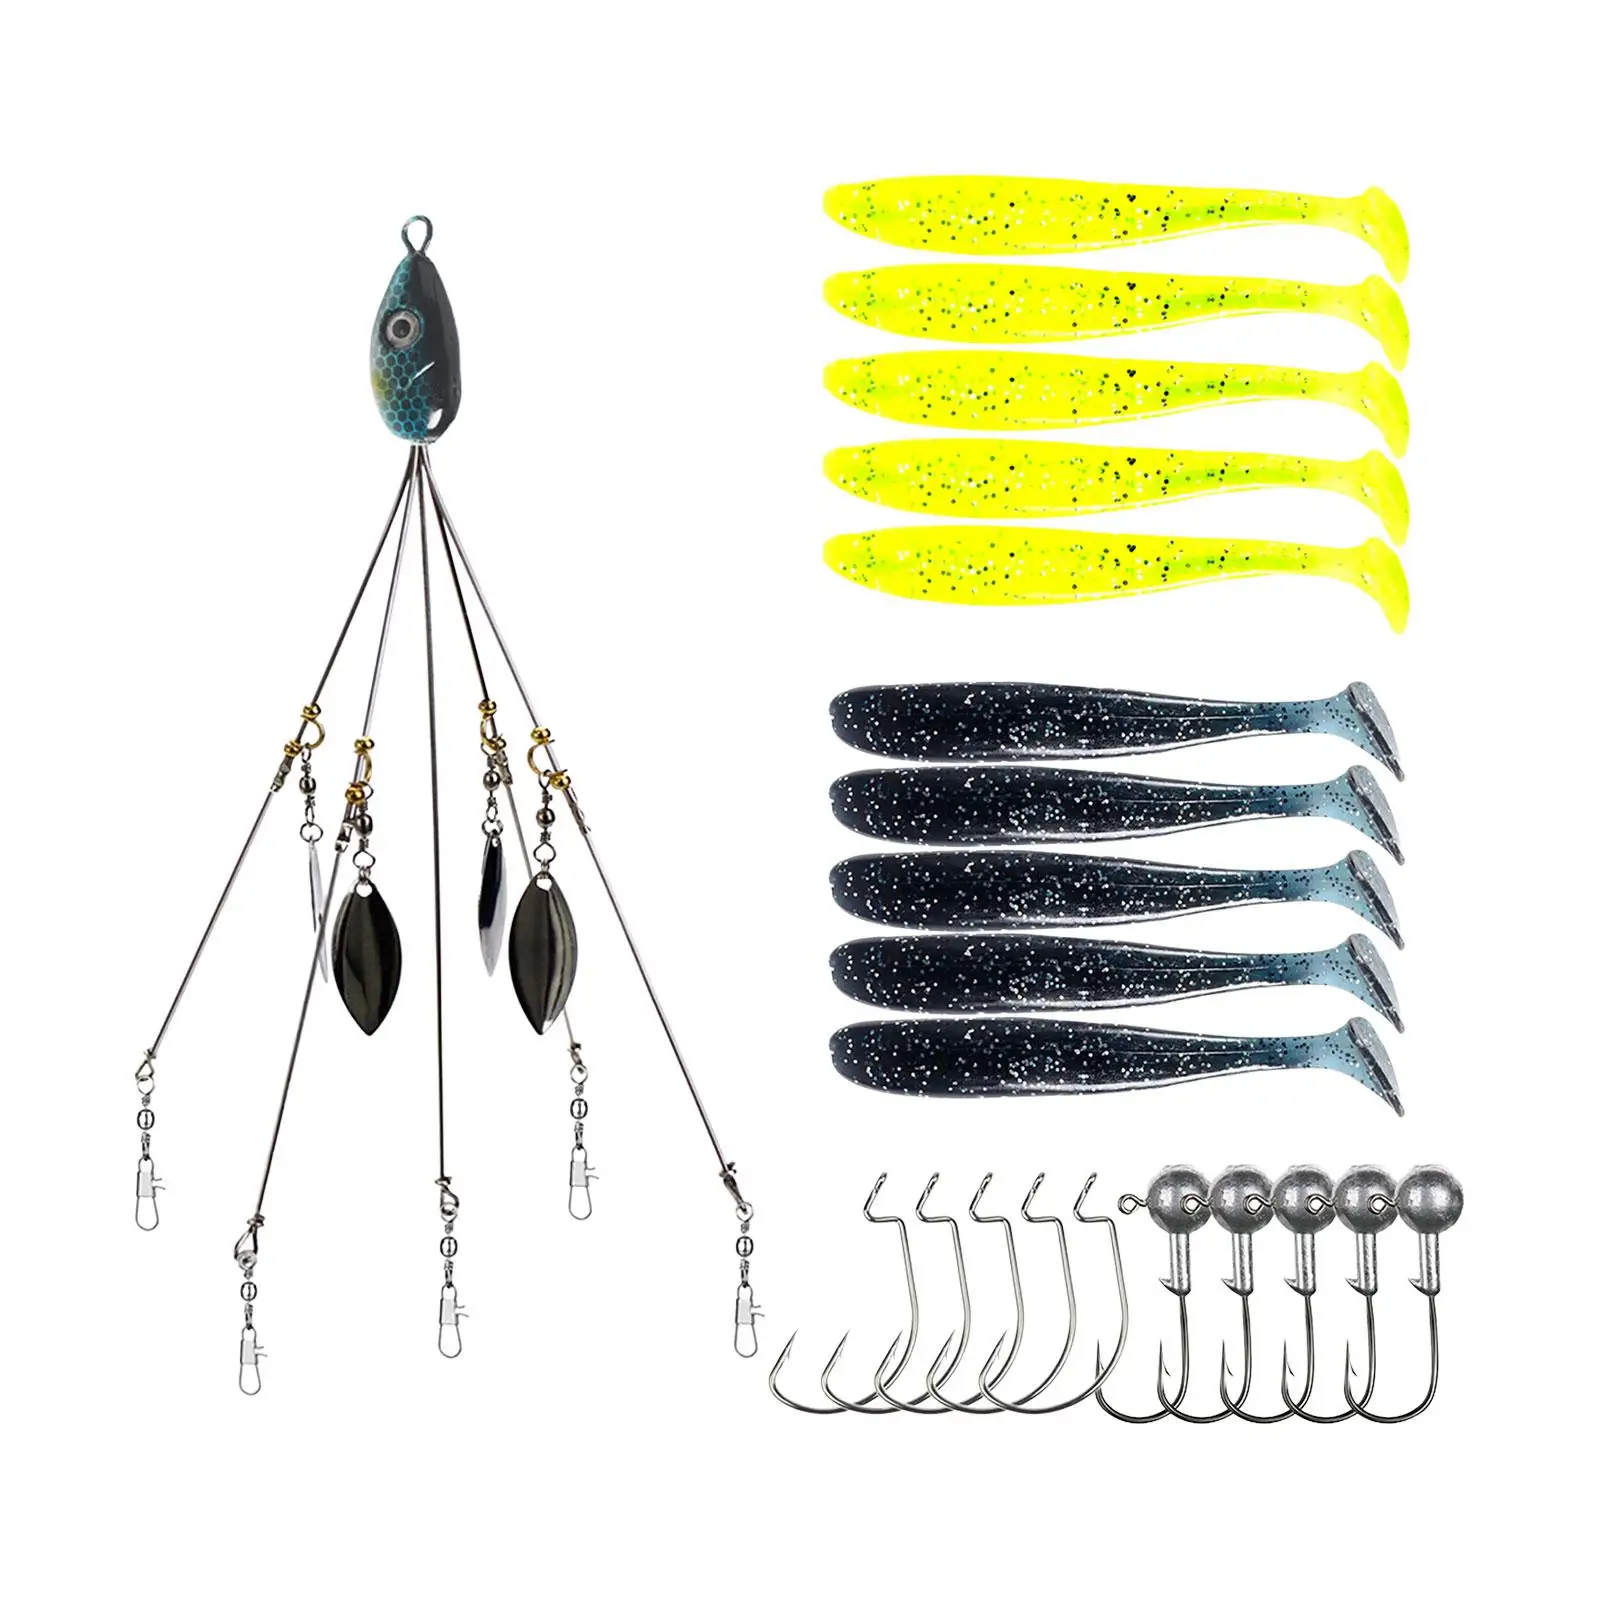 Umbrella Rig Freshwater/saltwater with 4 Leaves 5 Arms for Striper Fishing A Rig for Trout Crappie Walleye Pickerel